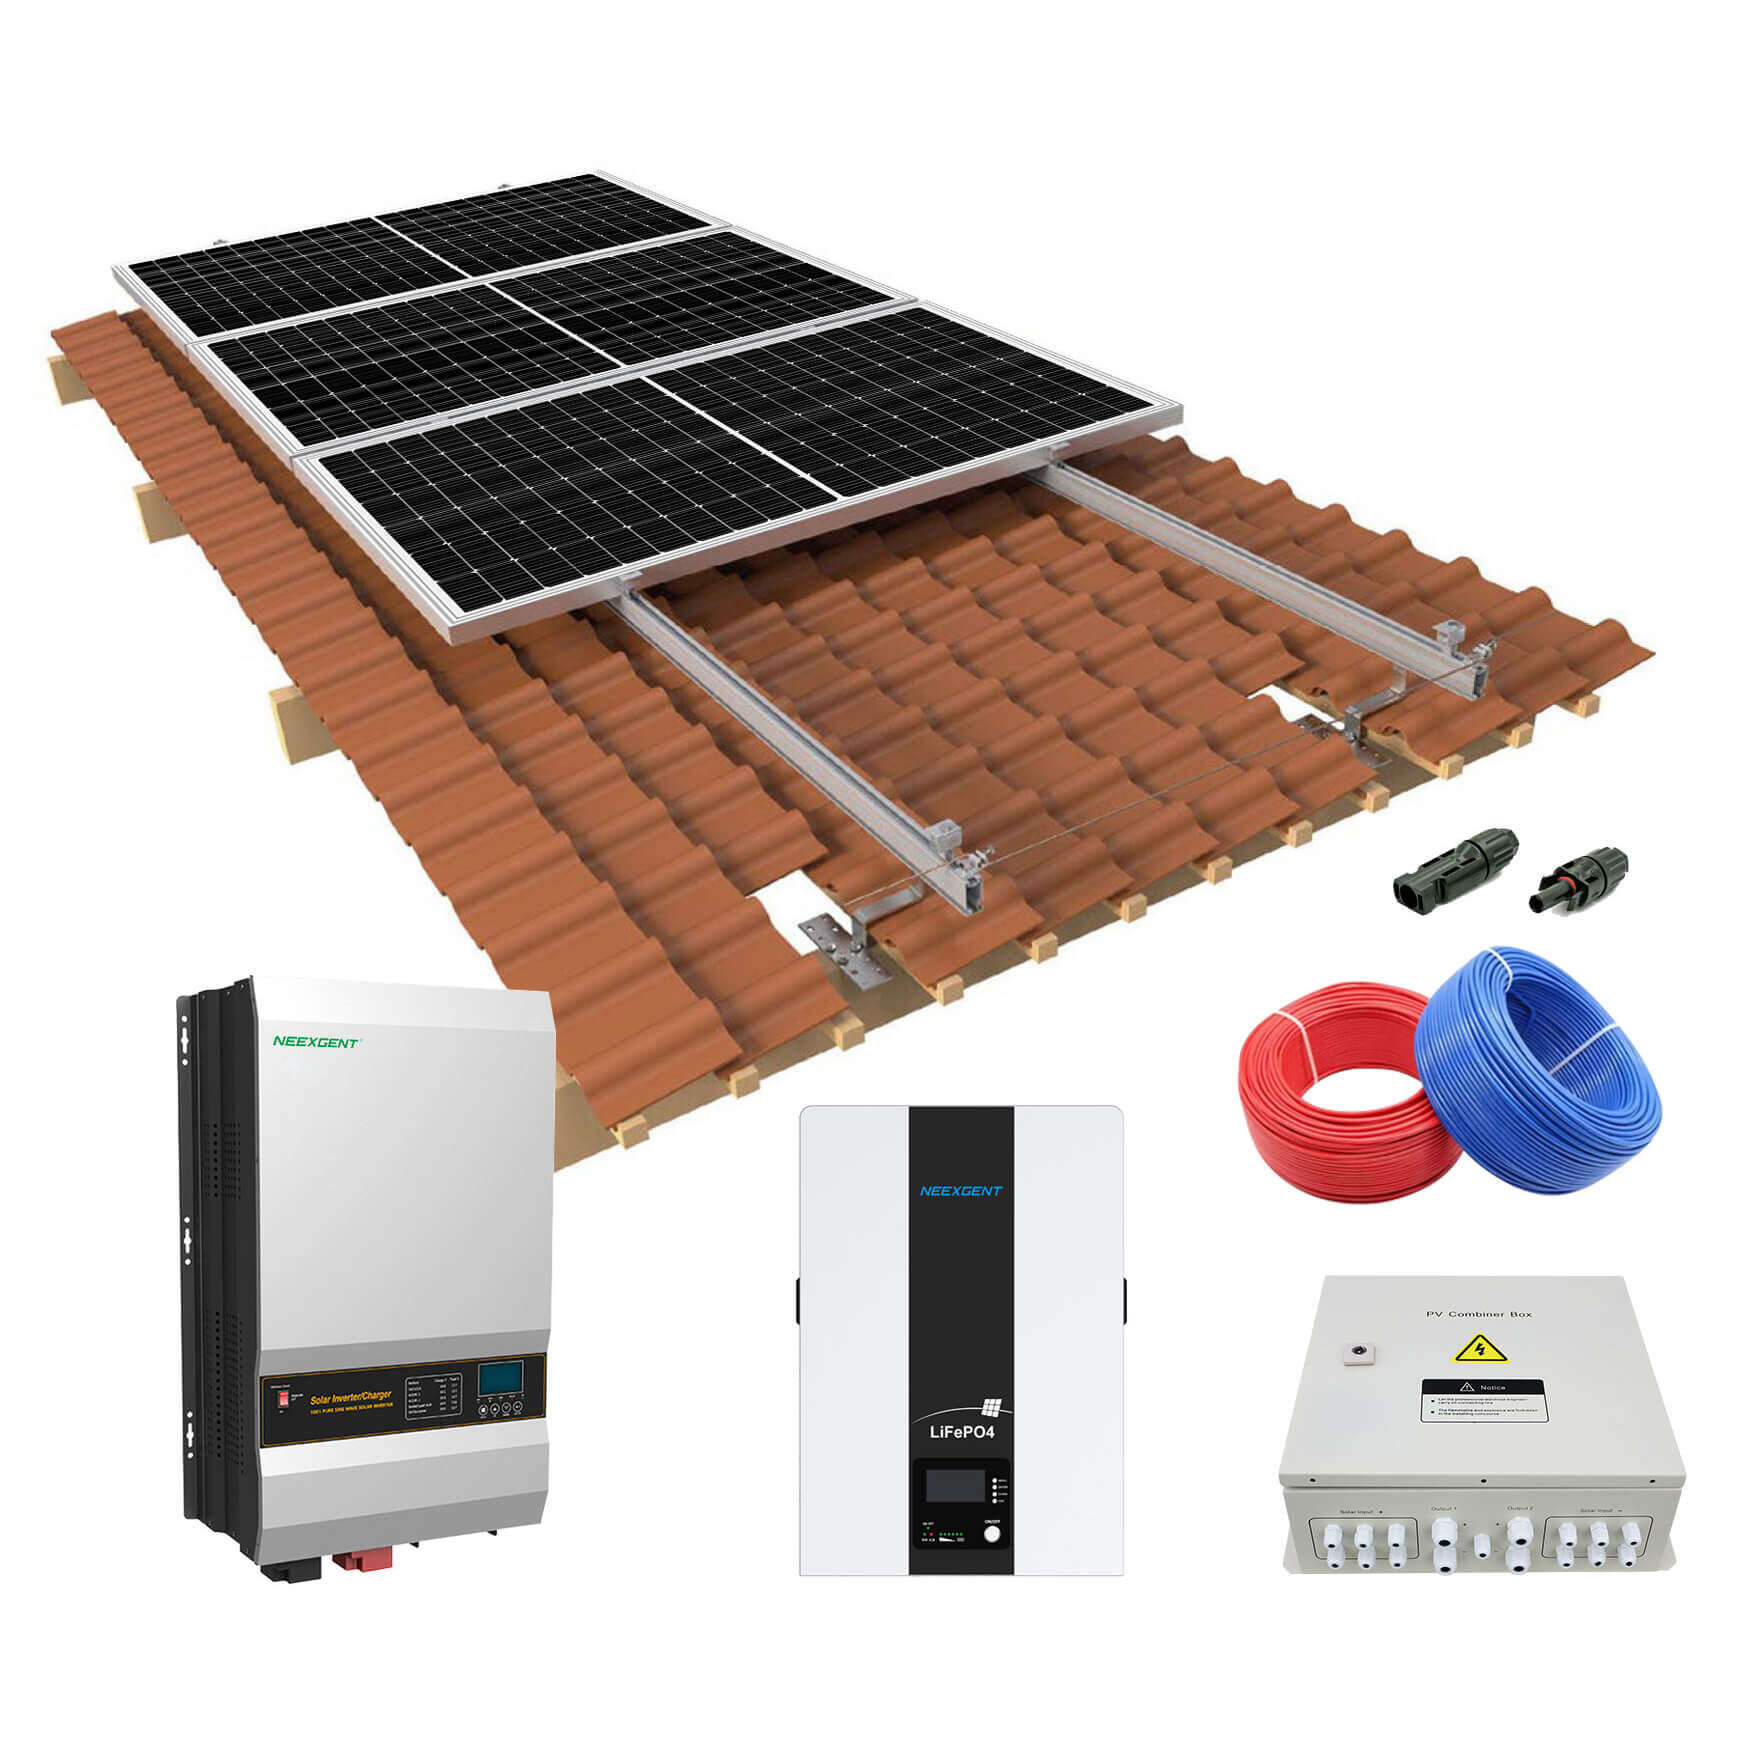 off grid system 8kw